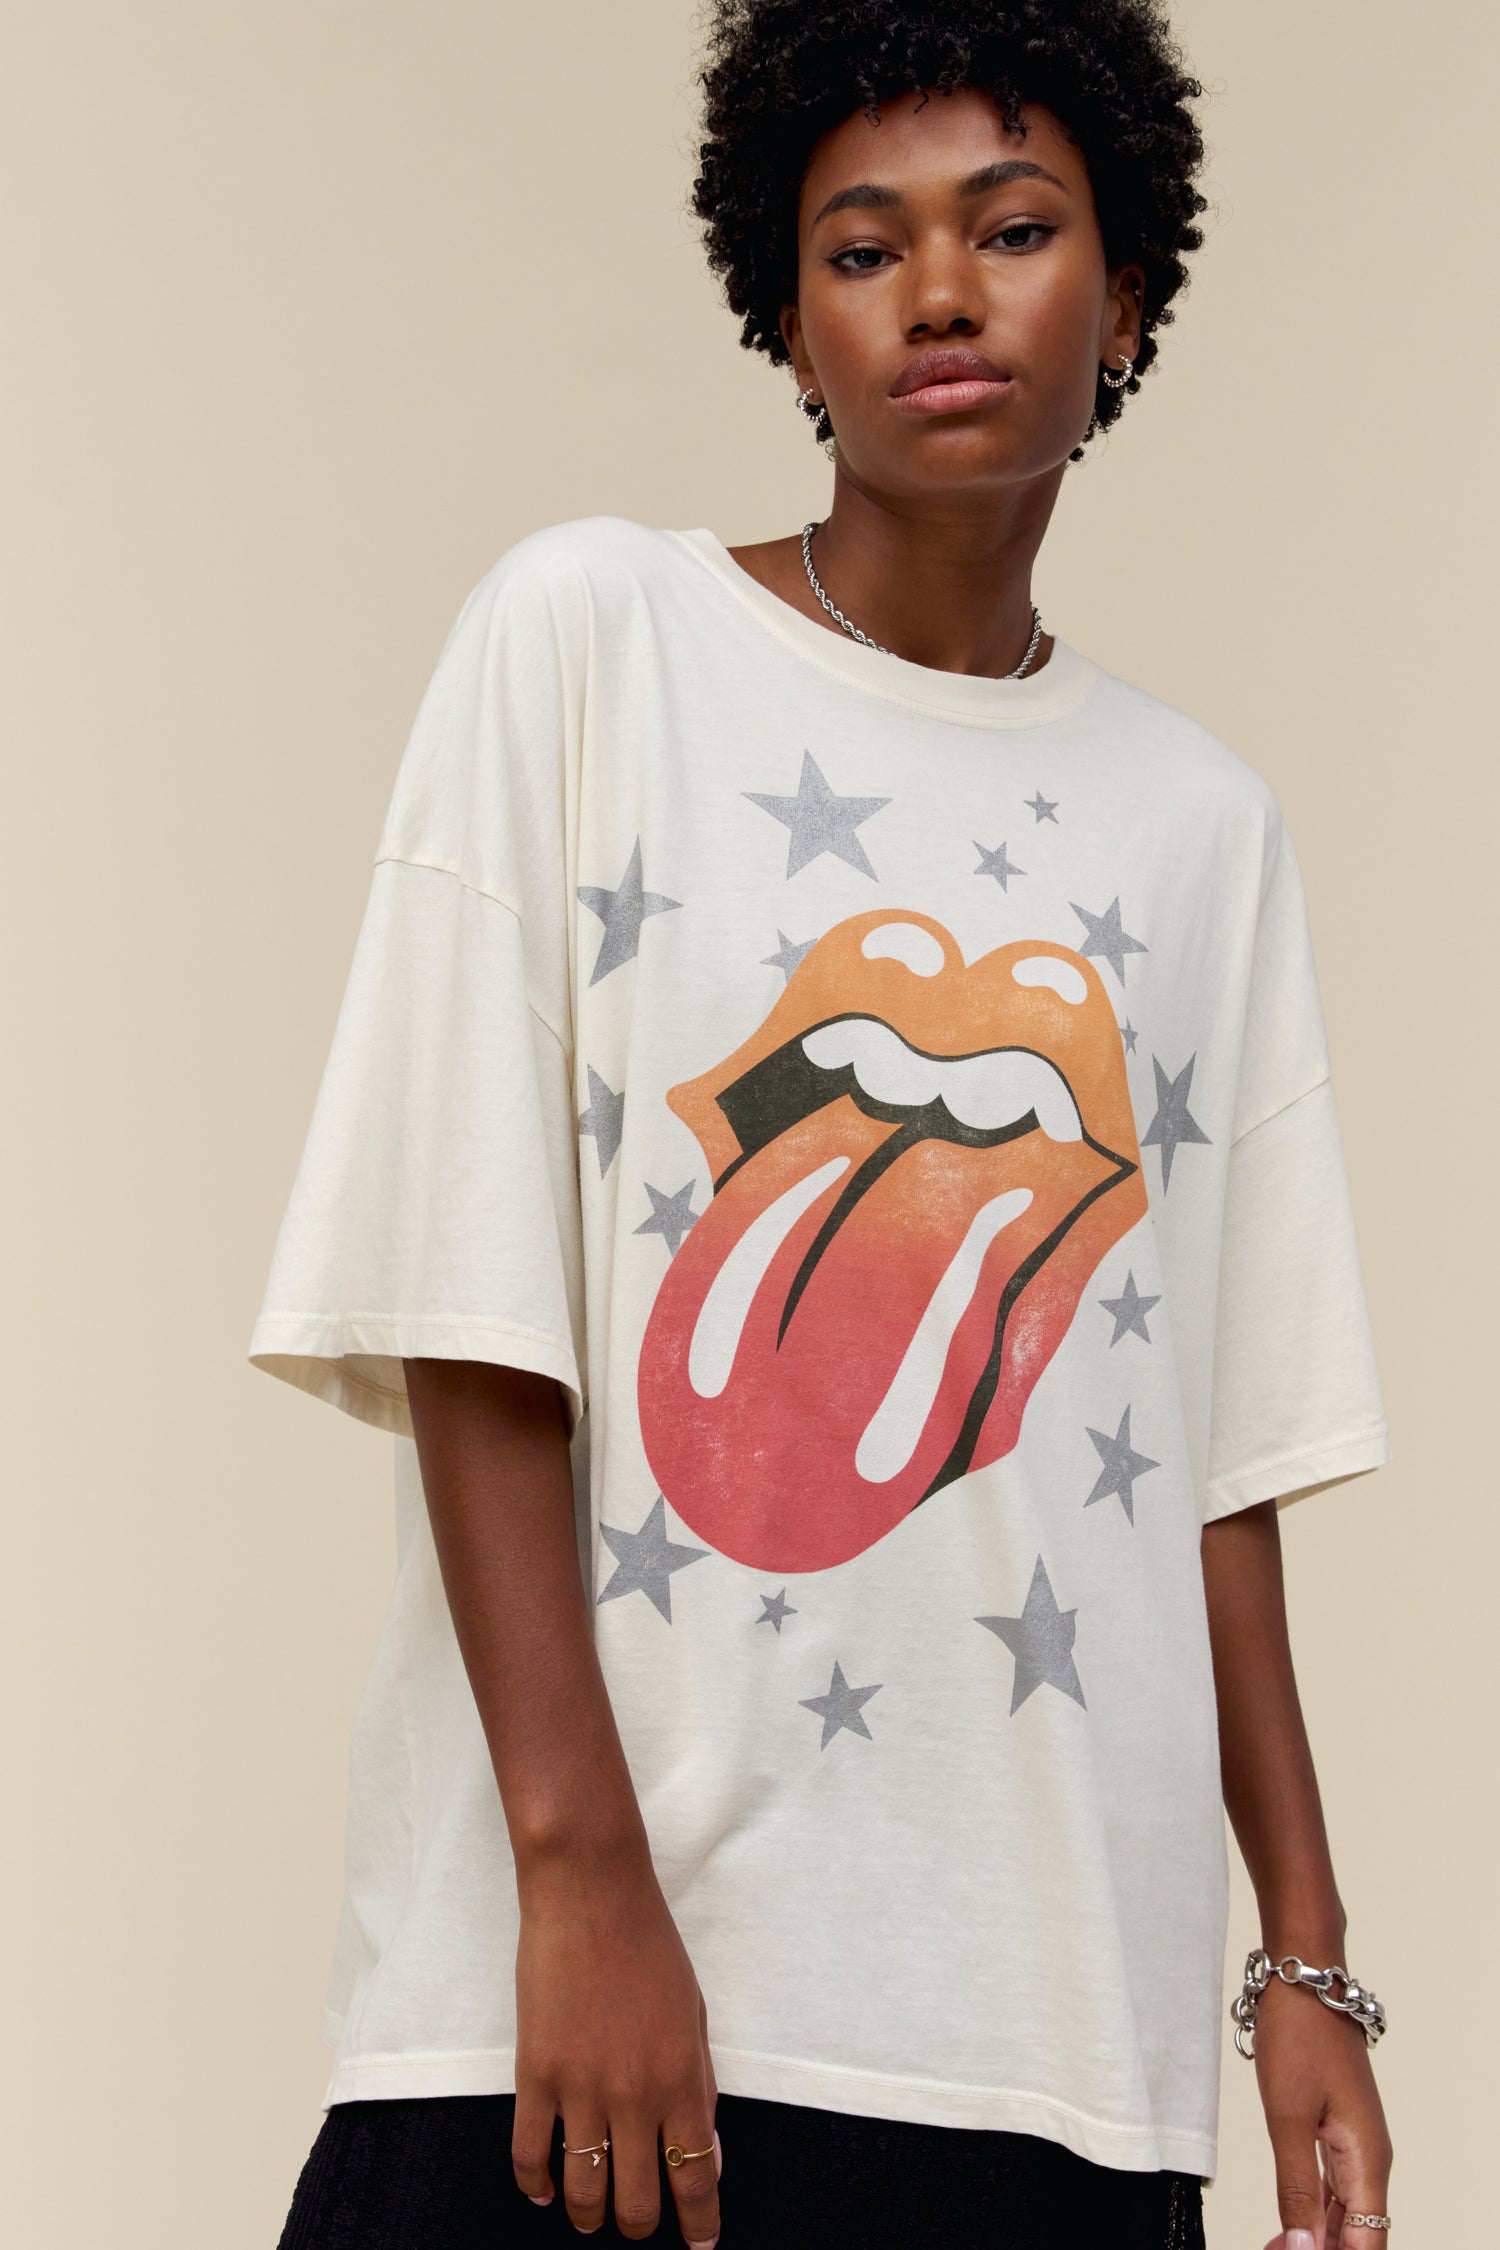 Model wearing an oversized Rolling Stones graphic tee in dirty white